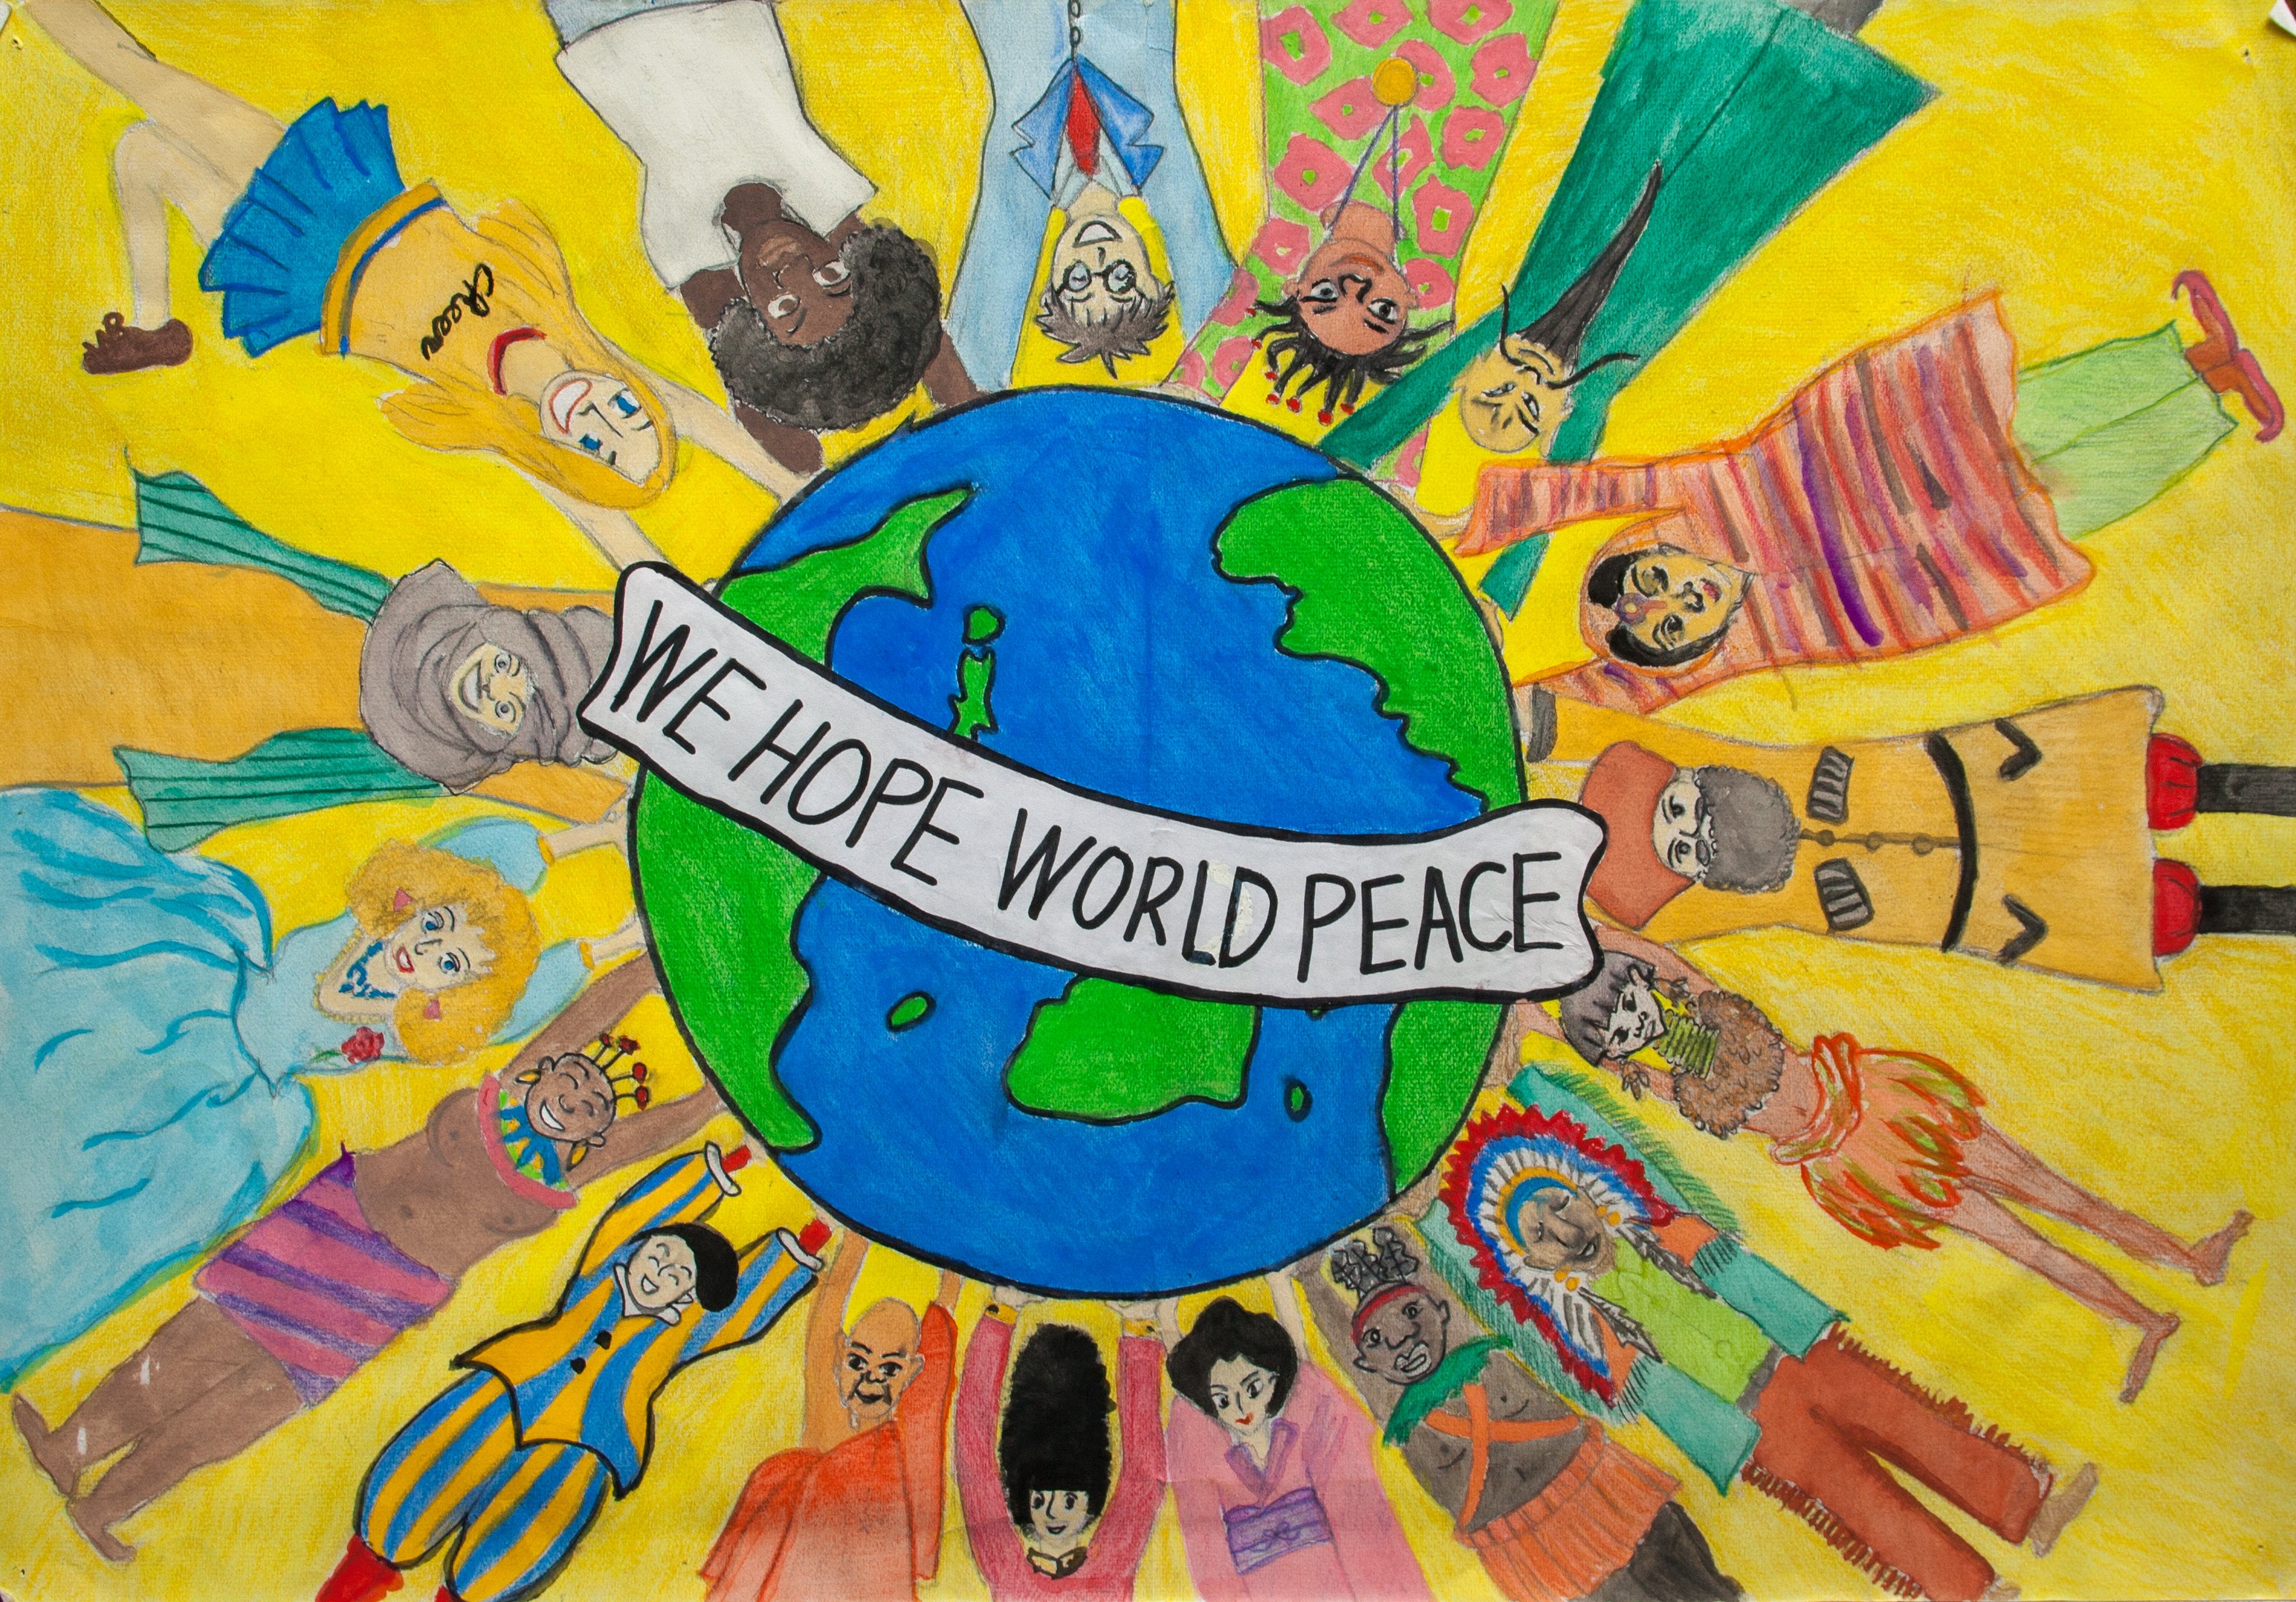 World Map Peace Images Best We Hope World Peace - 3dnews.co New ...